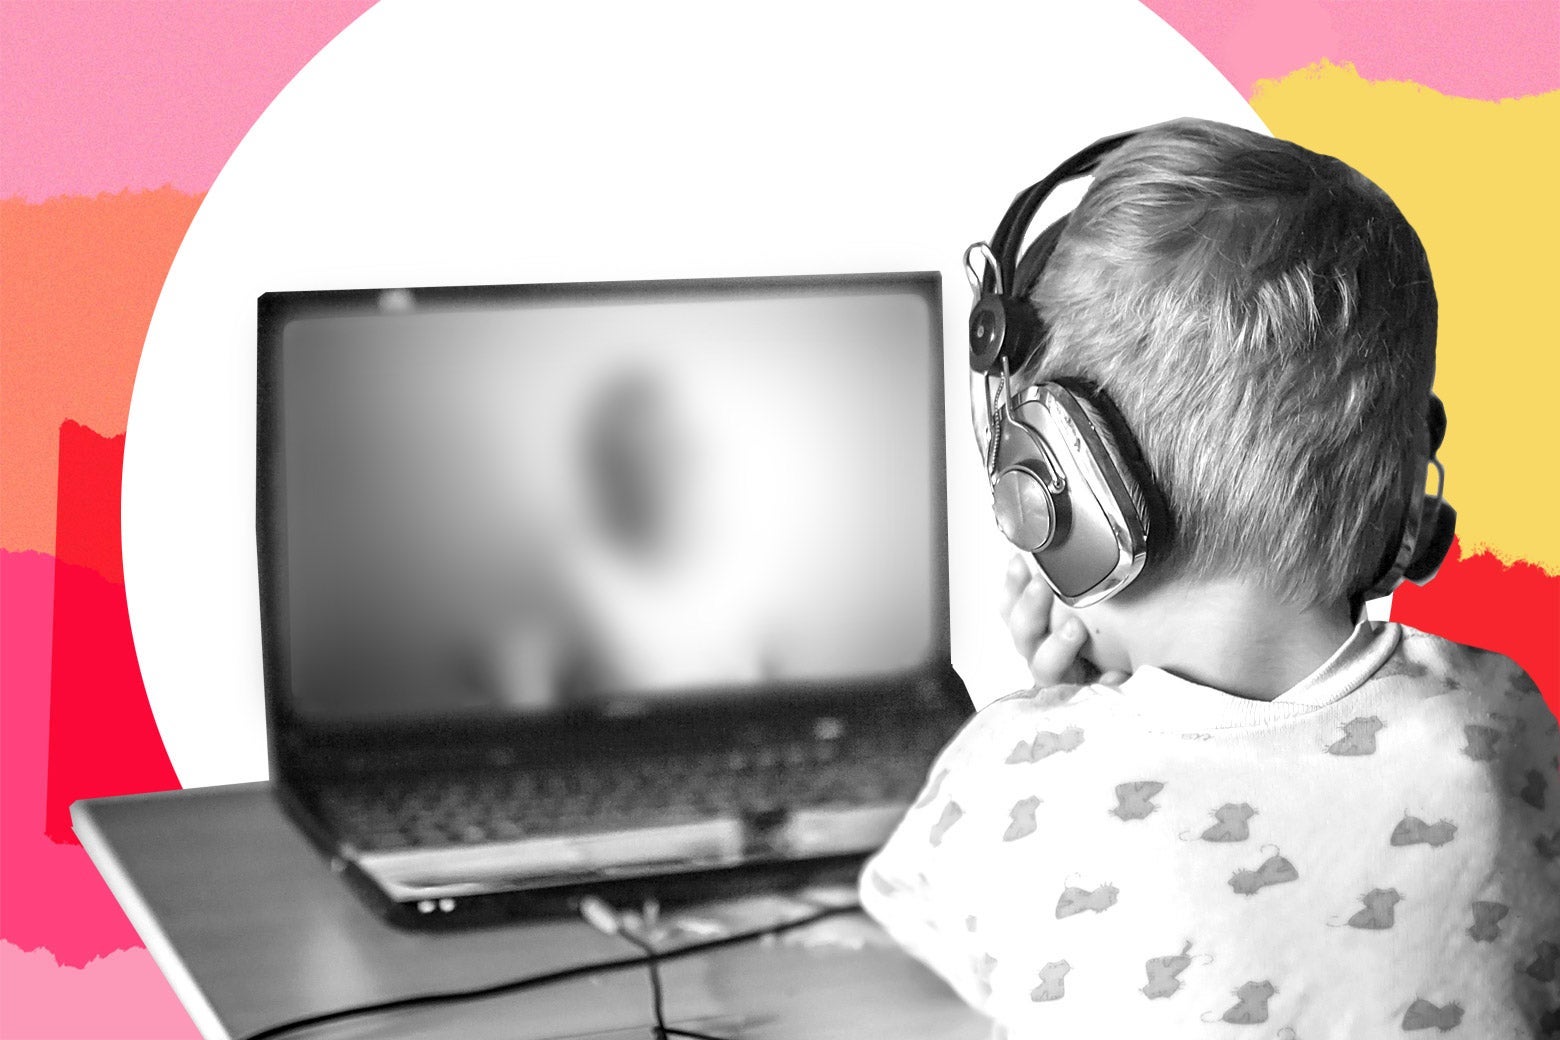 Sexy 8 Boy - Online school causing introduction to porn: parenting advice from Care and  Feeding.